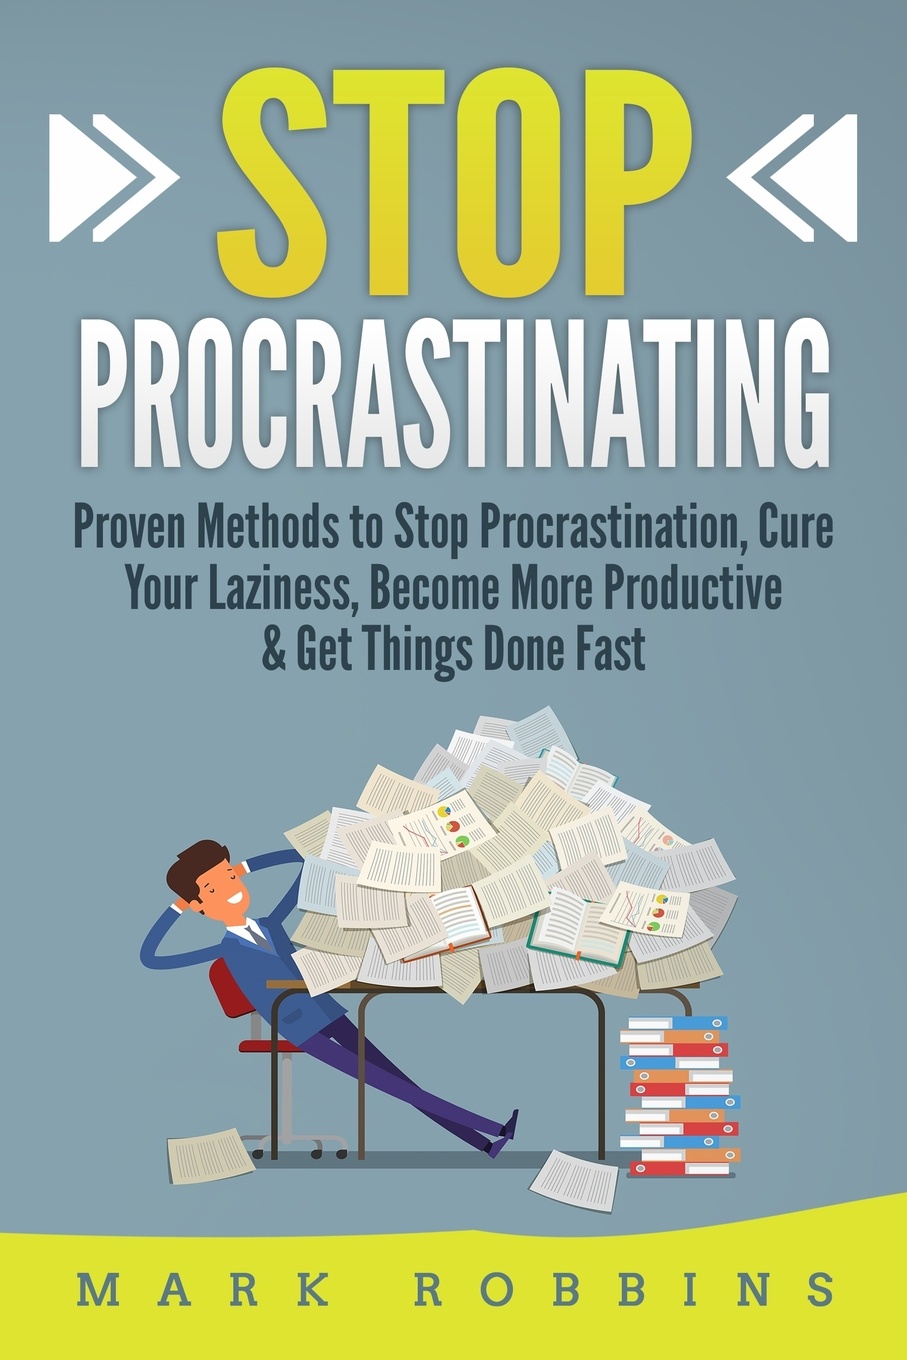 Stop Procrastinating. Proven Methods to Stop Procrastination, Cure Your Laziness, Become More Productive & Get Things Done Fast